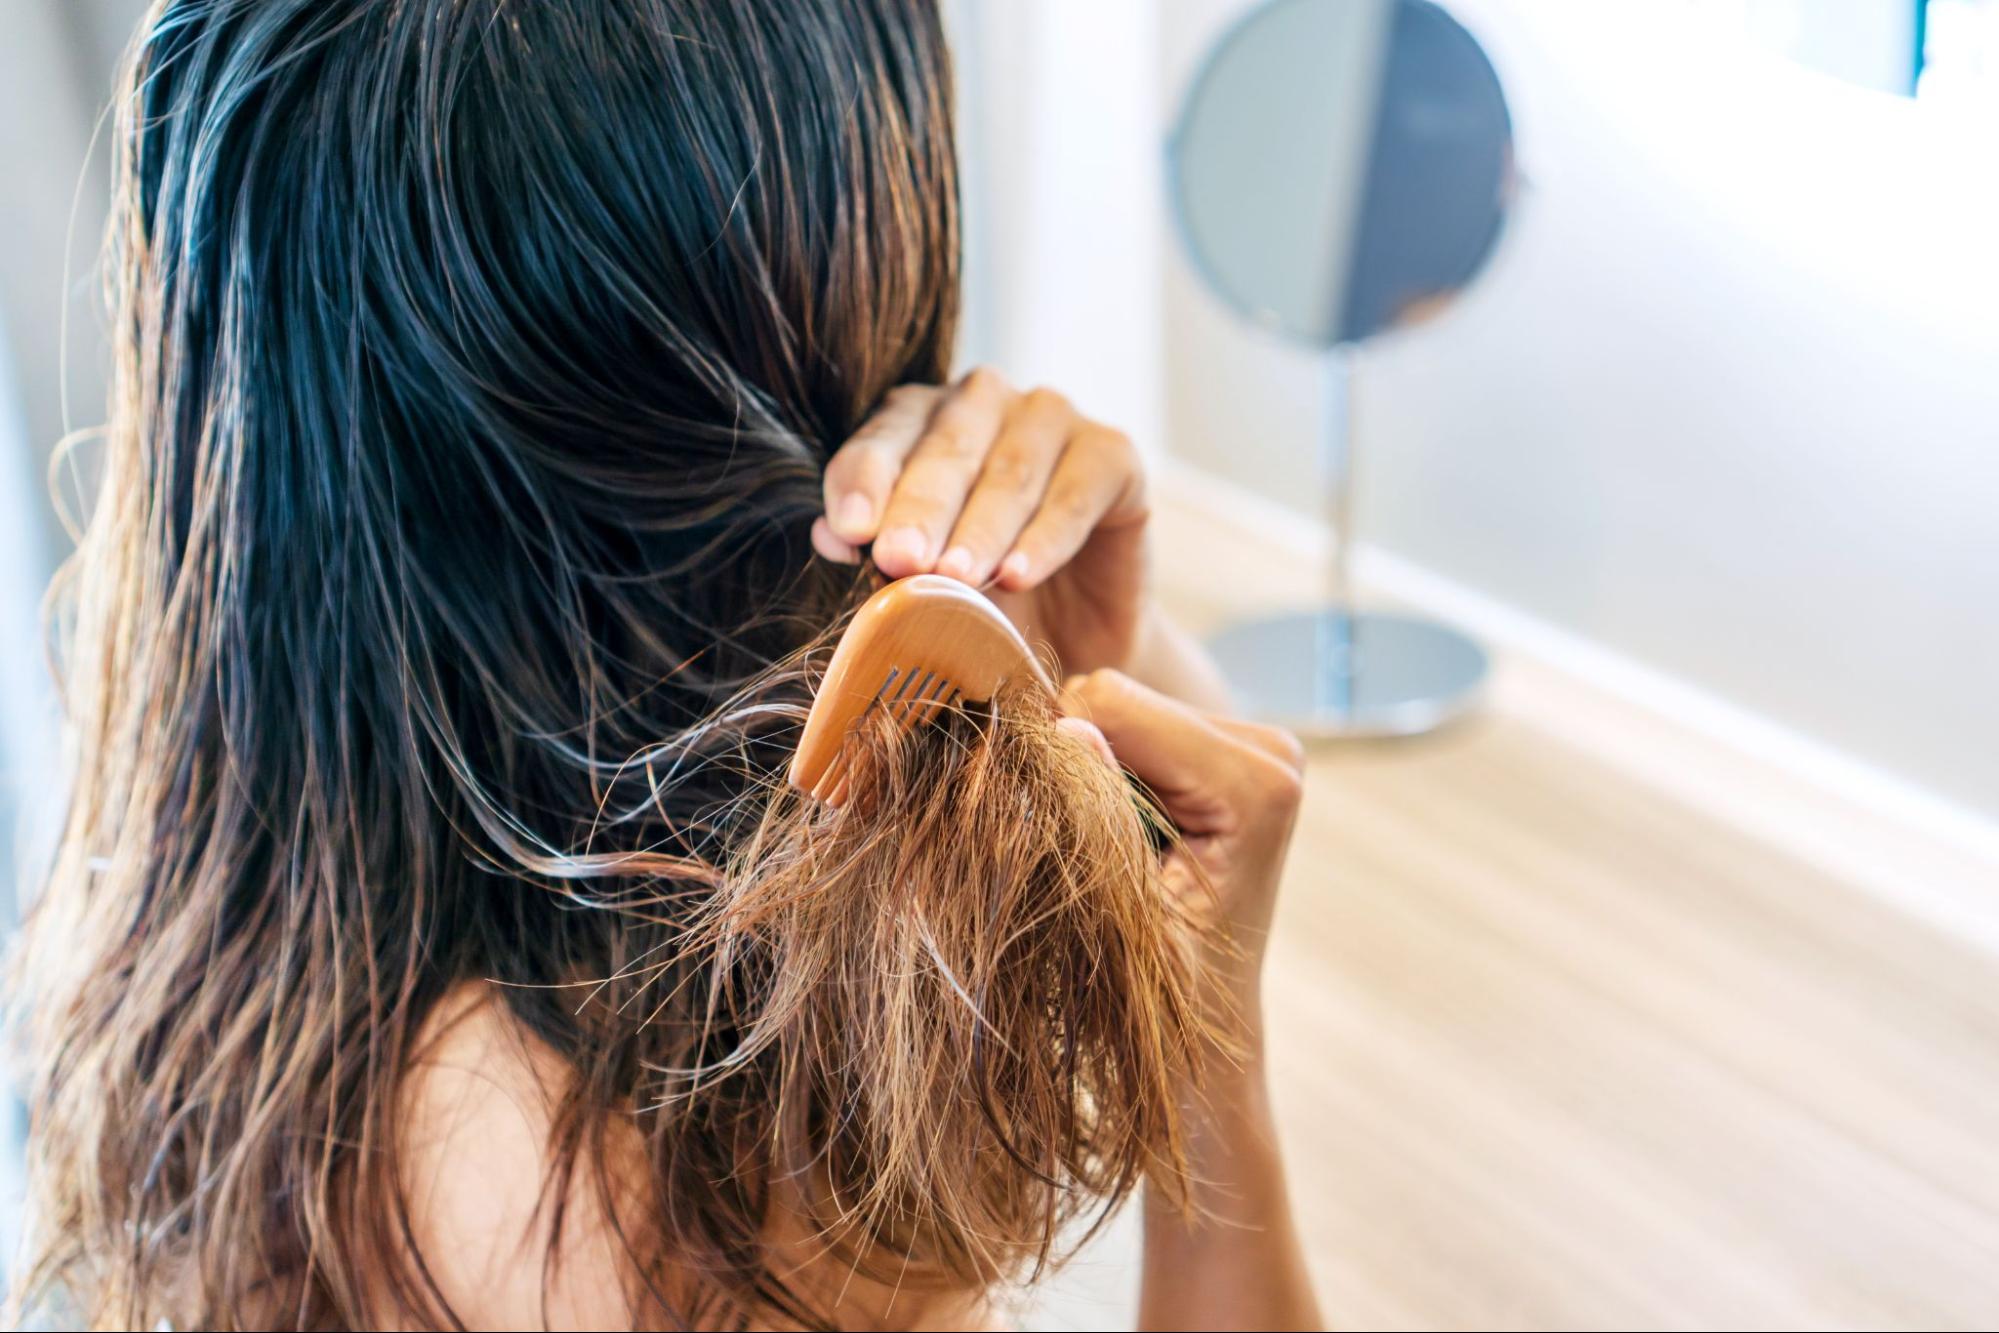 How to wash your hair correctly so it doesn't get damaged.